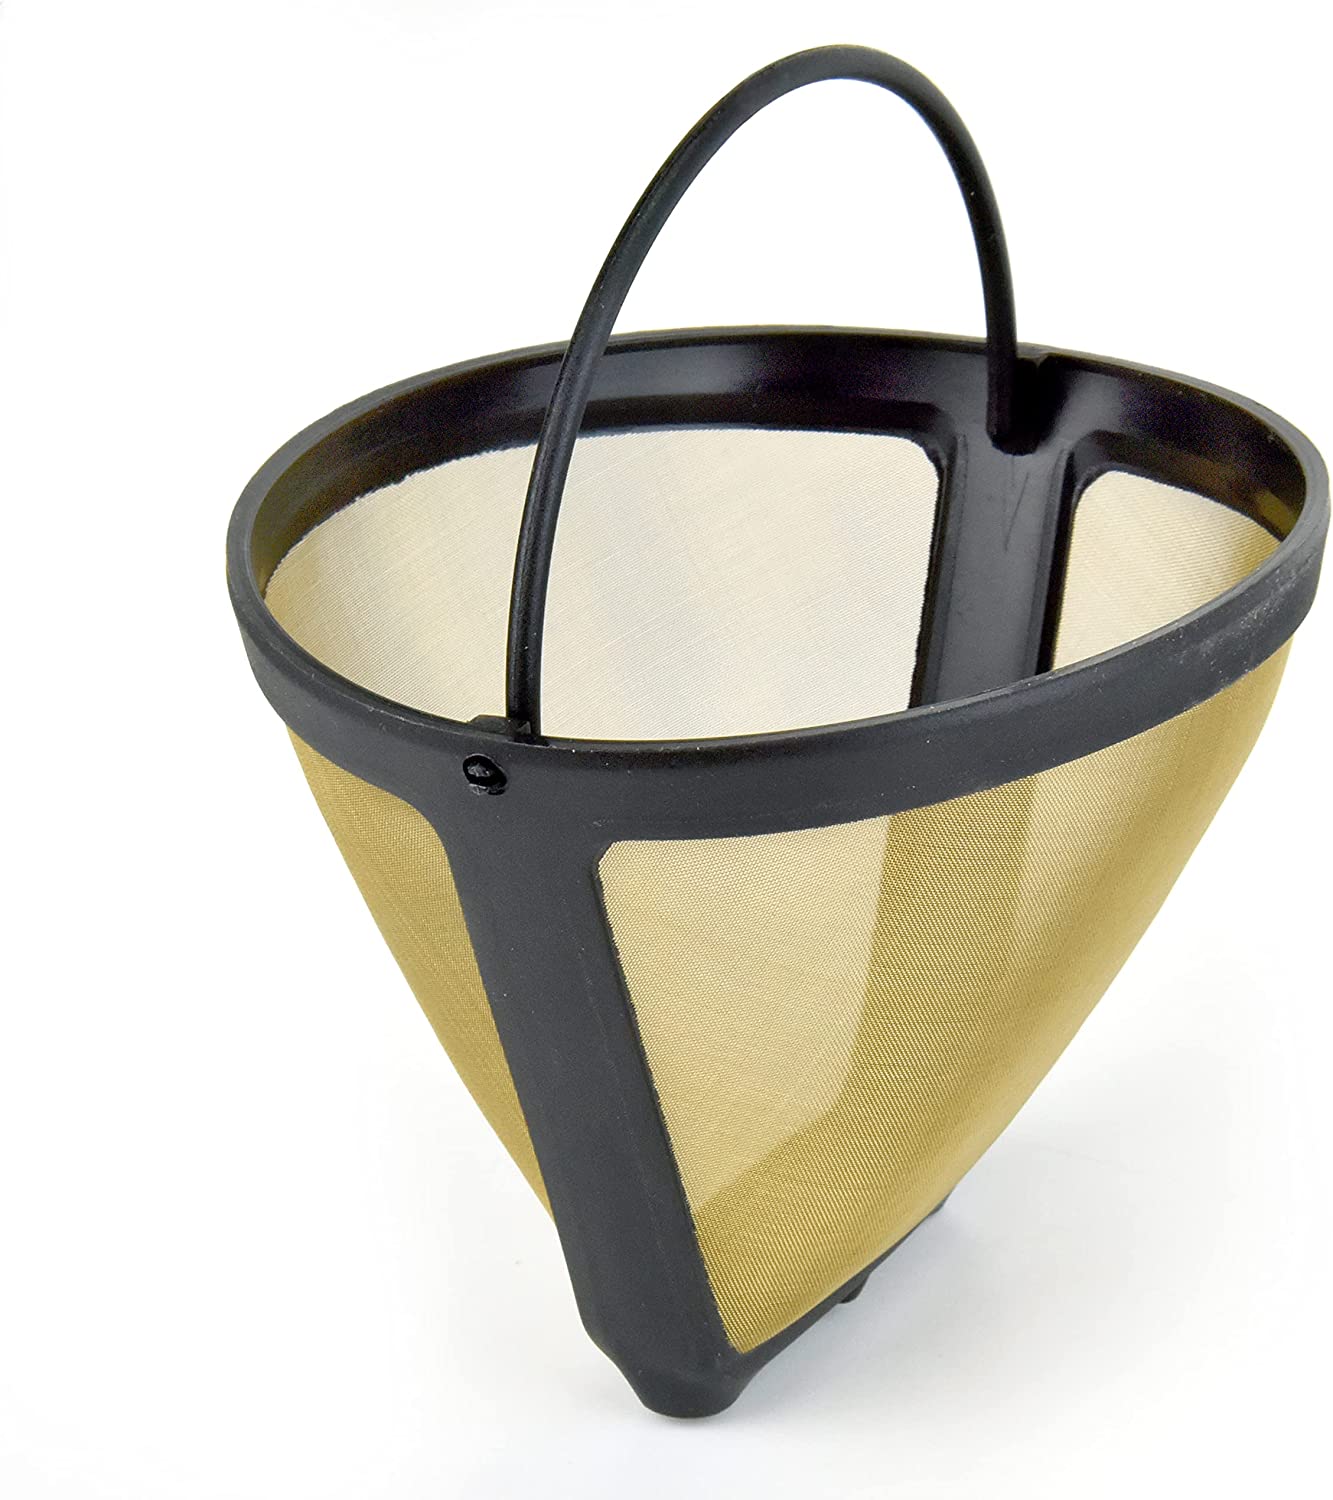 Gold Tone Delibru Cone Style Replacement Coffee Filter Basket for Cuisinart Coffee Maker - Size; Top : 4.12", Height : 3.18", Bottom : 2.12"